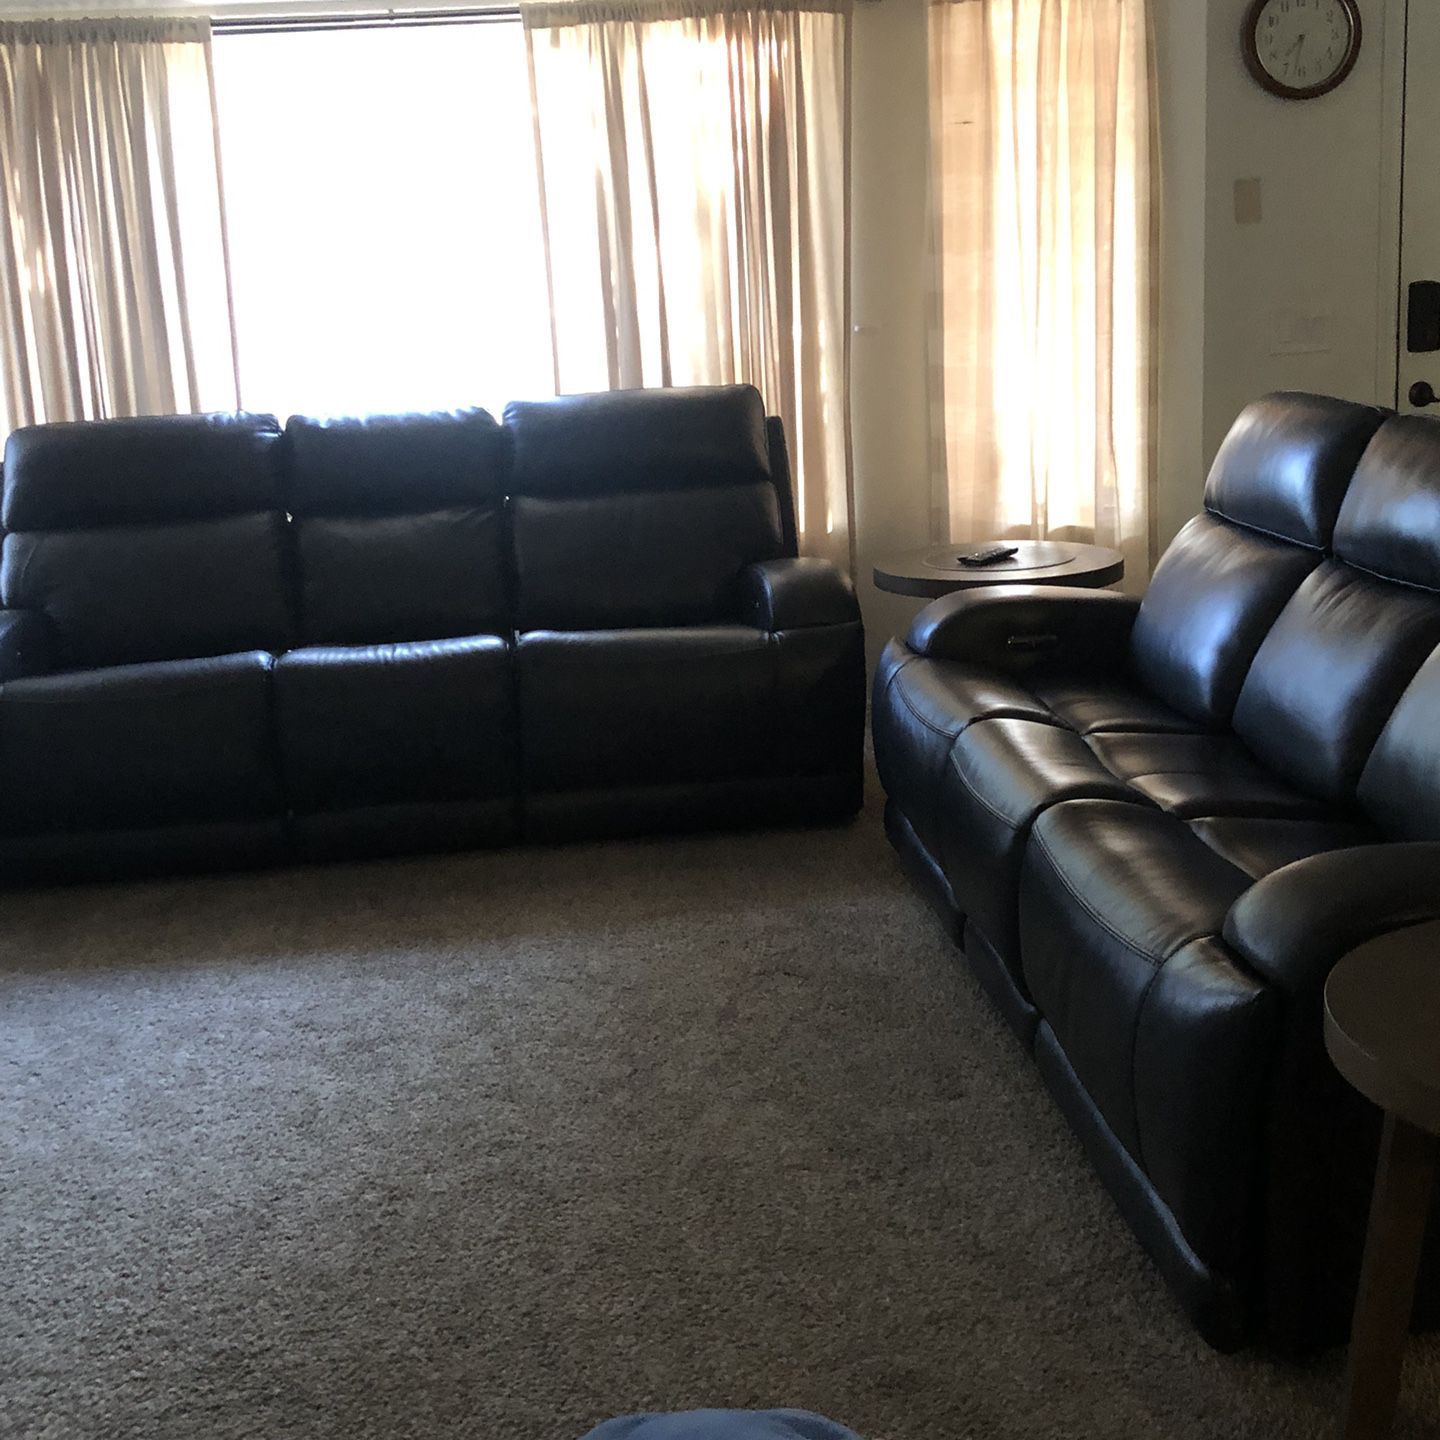 Leather Couch - Double Power Recliner, Lumbar And Headrest